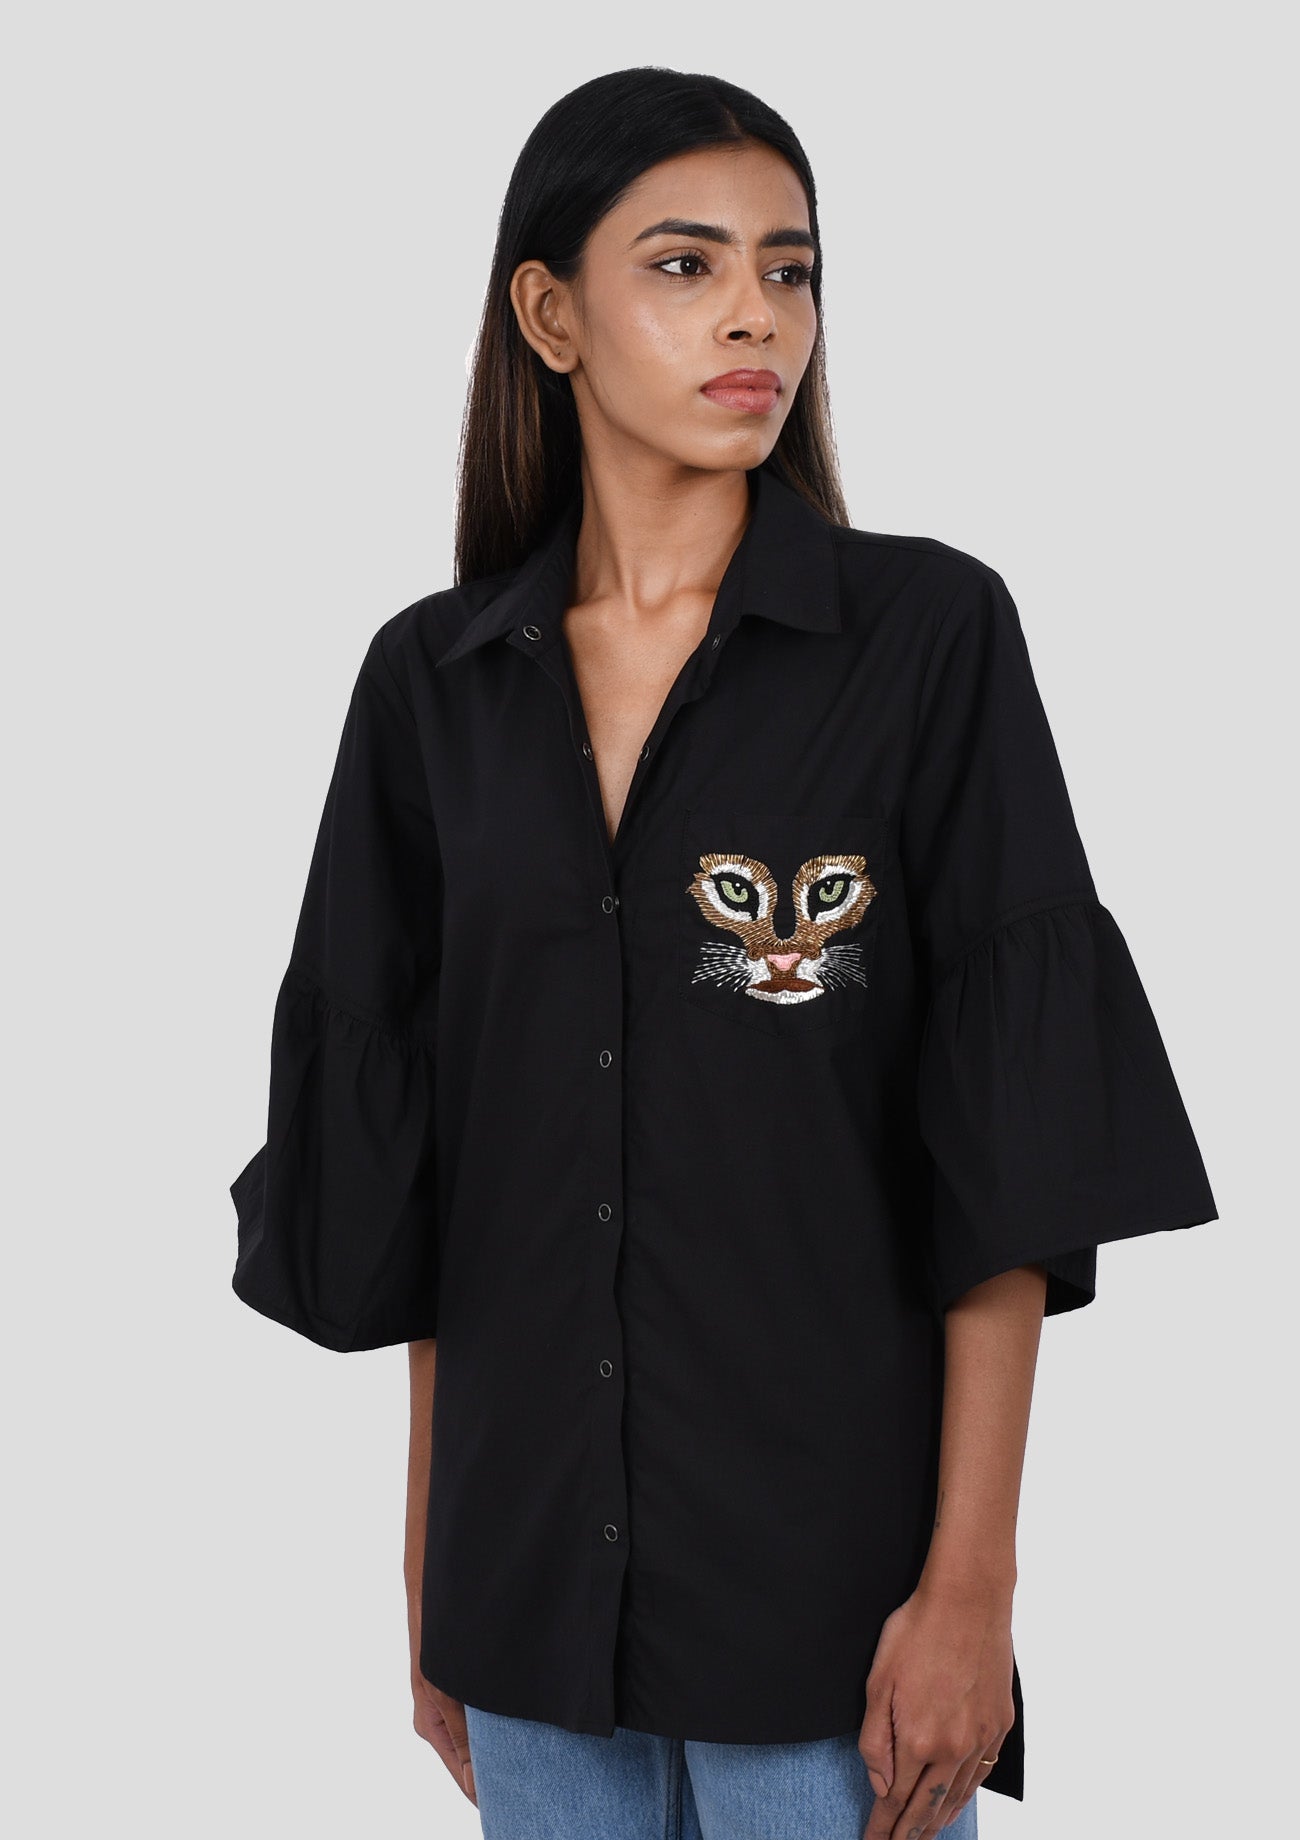 Black Cotton Shirt With Embroidered Pocket